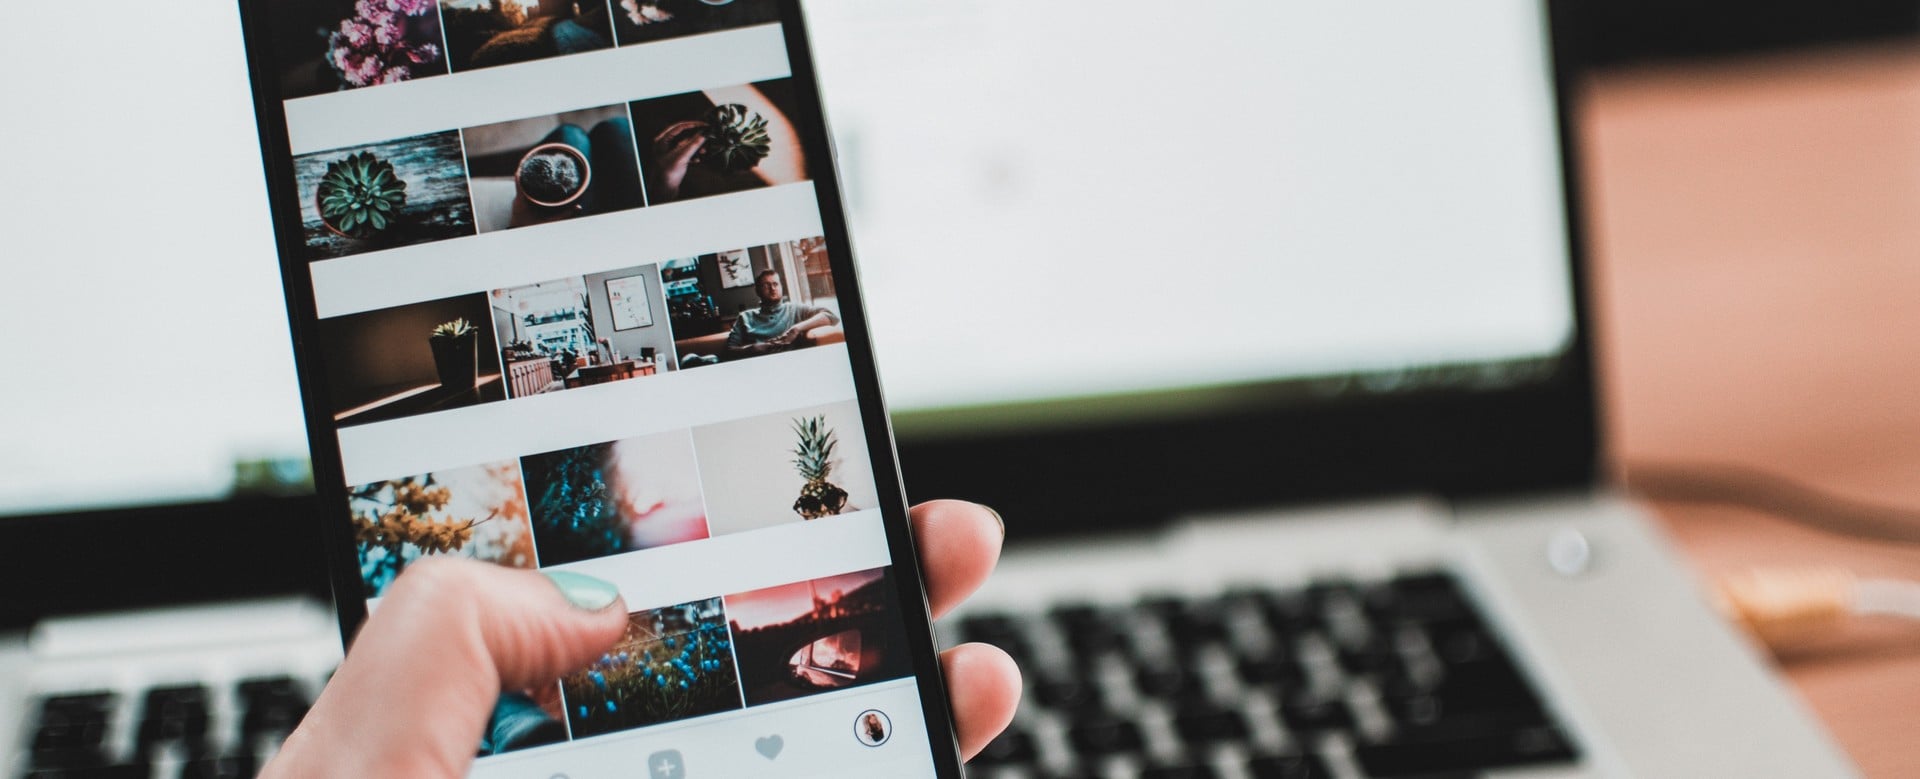 How To Integrate Social Media into Your Website Instagram